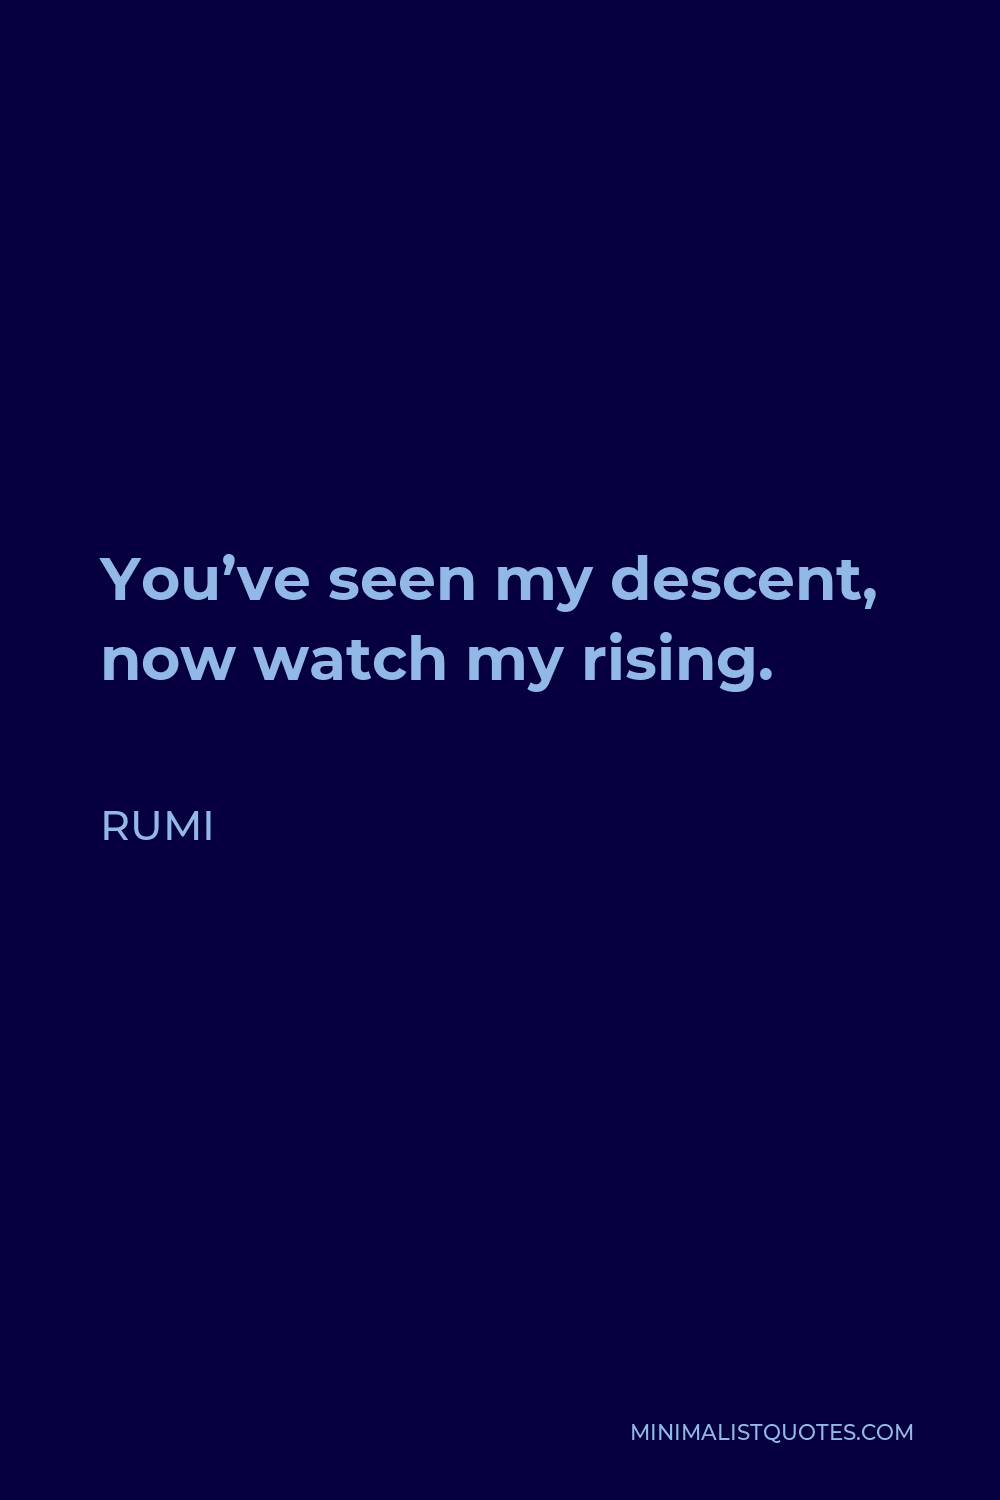 Rumi Quote - You’ve seen my descent, now watch my rising.